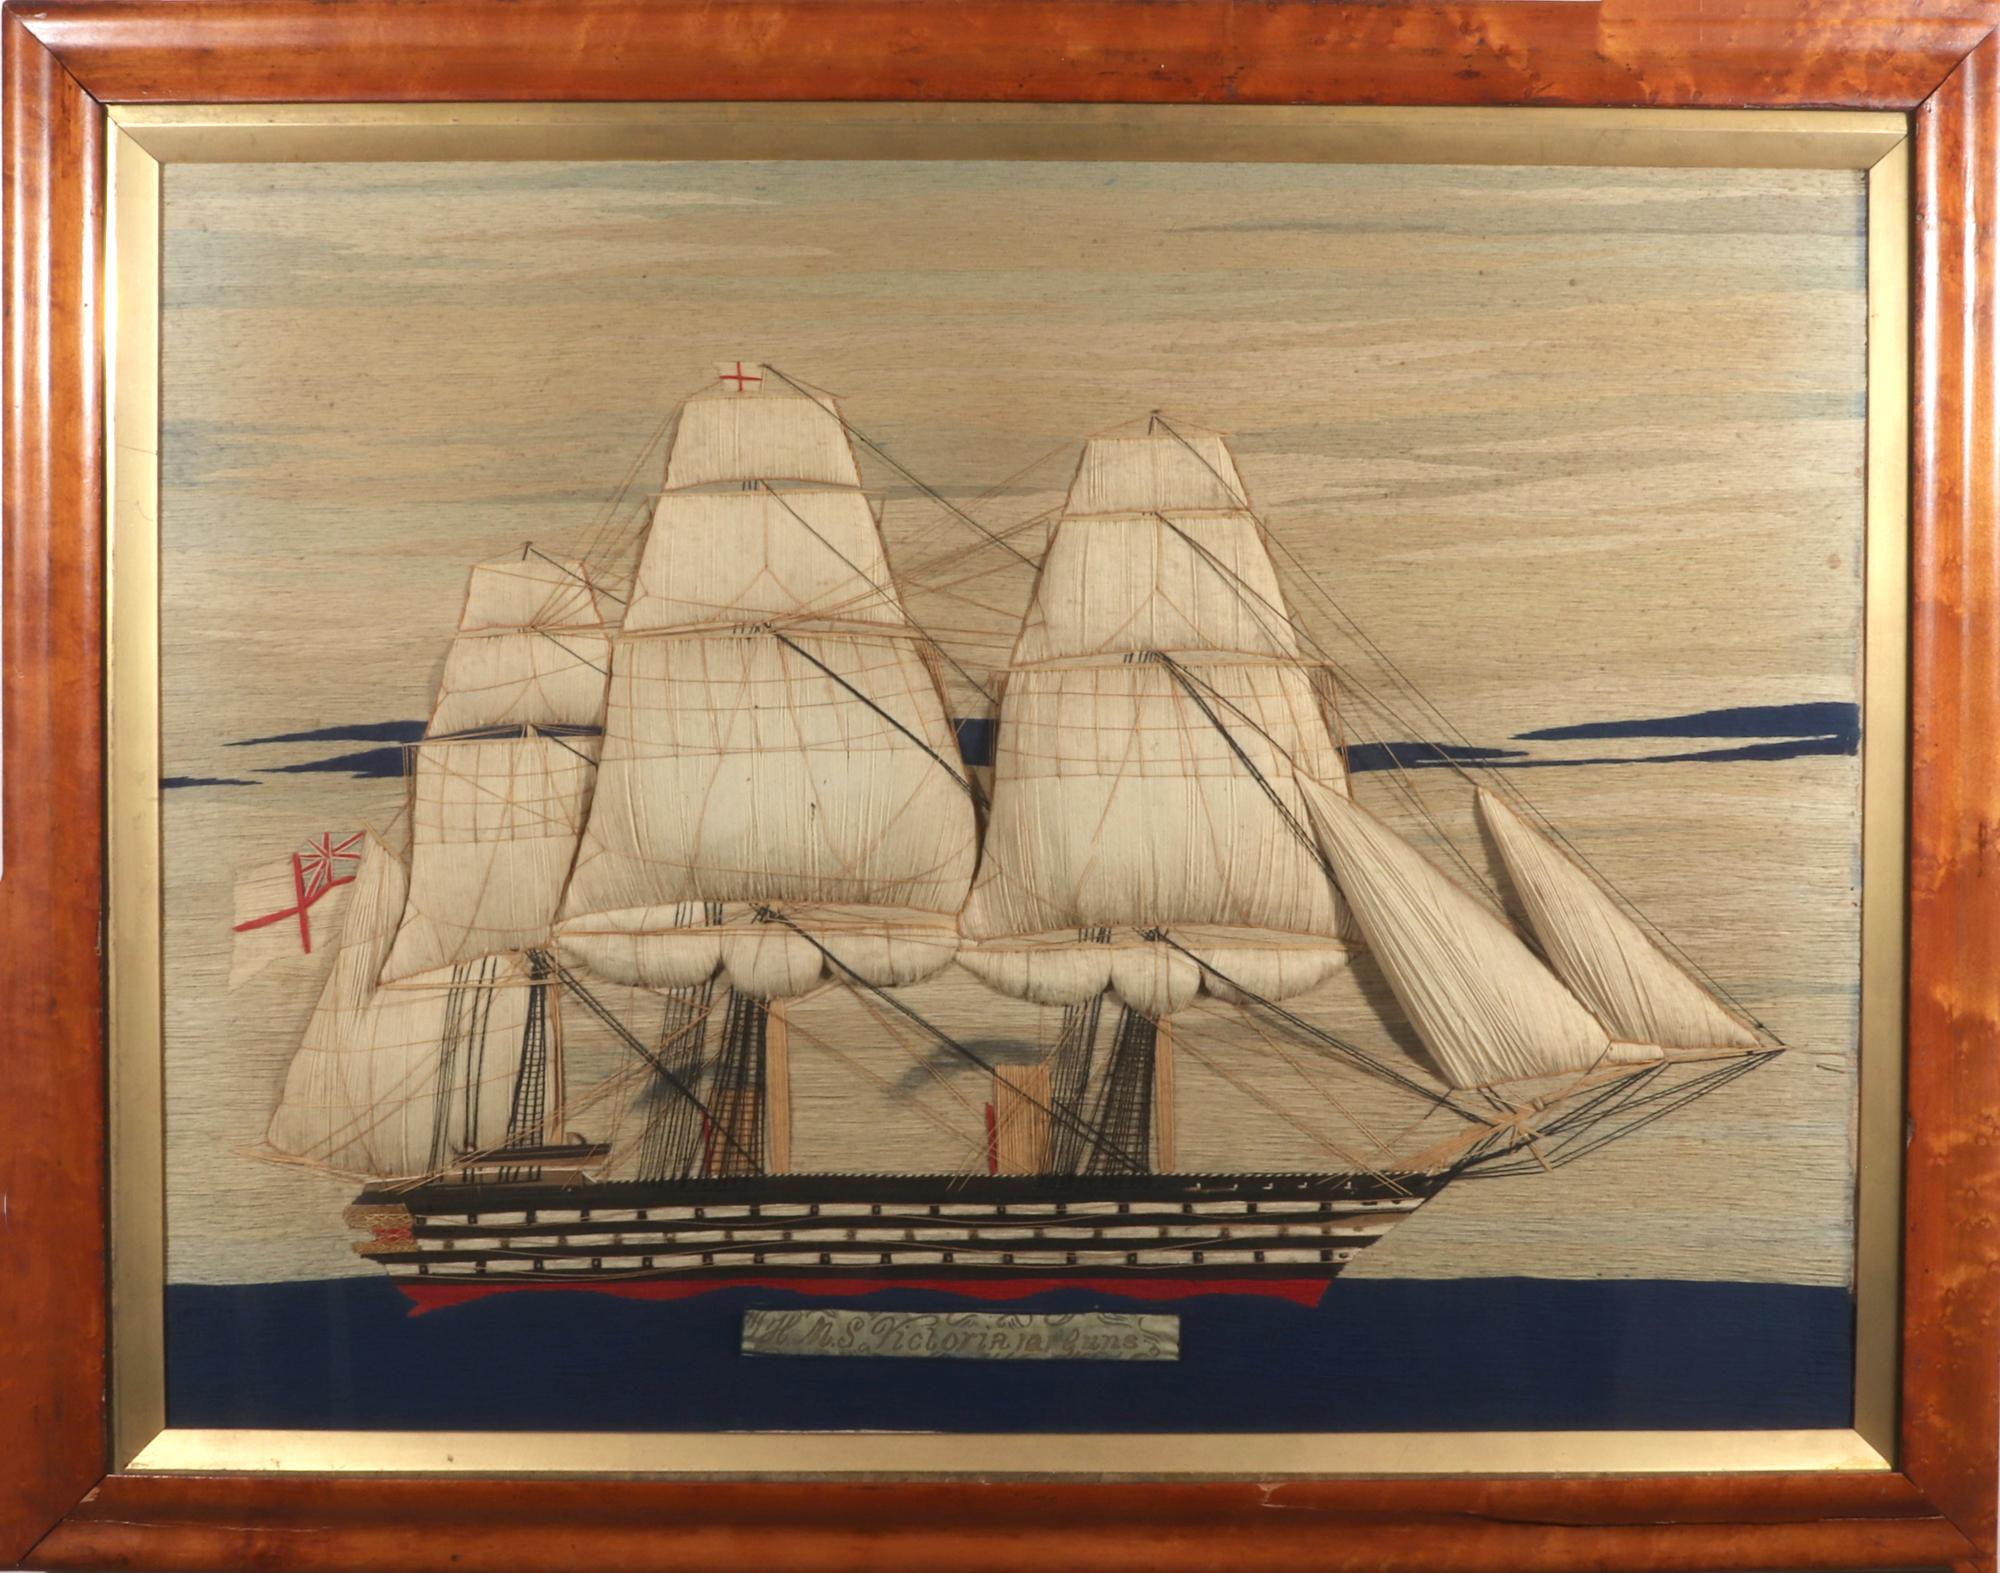 British sailor's woolwork woolie of HMS Victoria,
Berlin wool on linen (Duck),
circa 1865

The large sailor's woolwork or woolie depicts HMS Victoria, named below on a banner, with large billowing Trapunto sails. HMS Victoria was the last